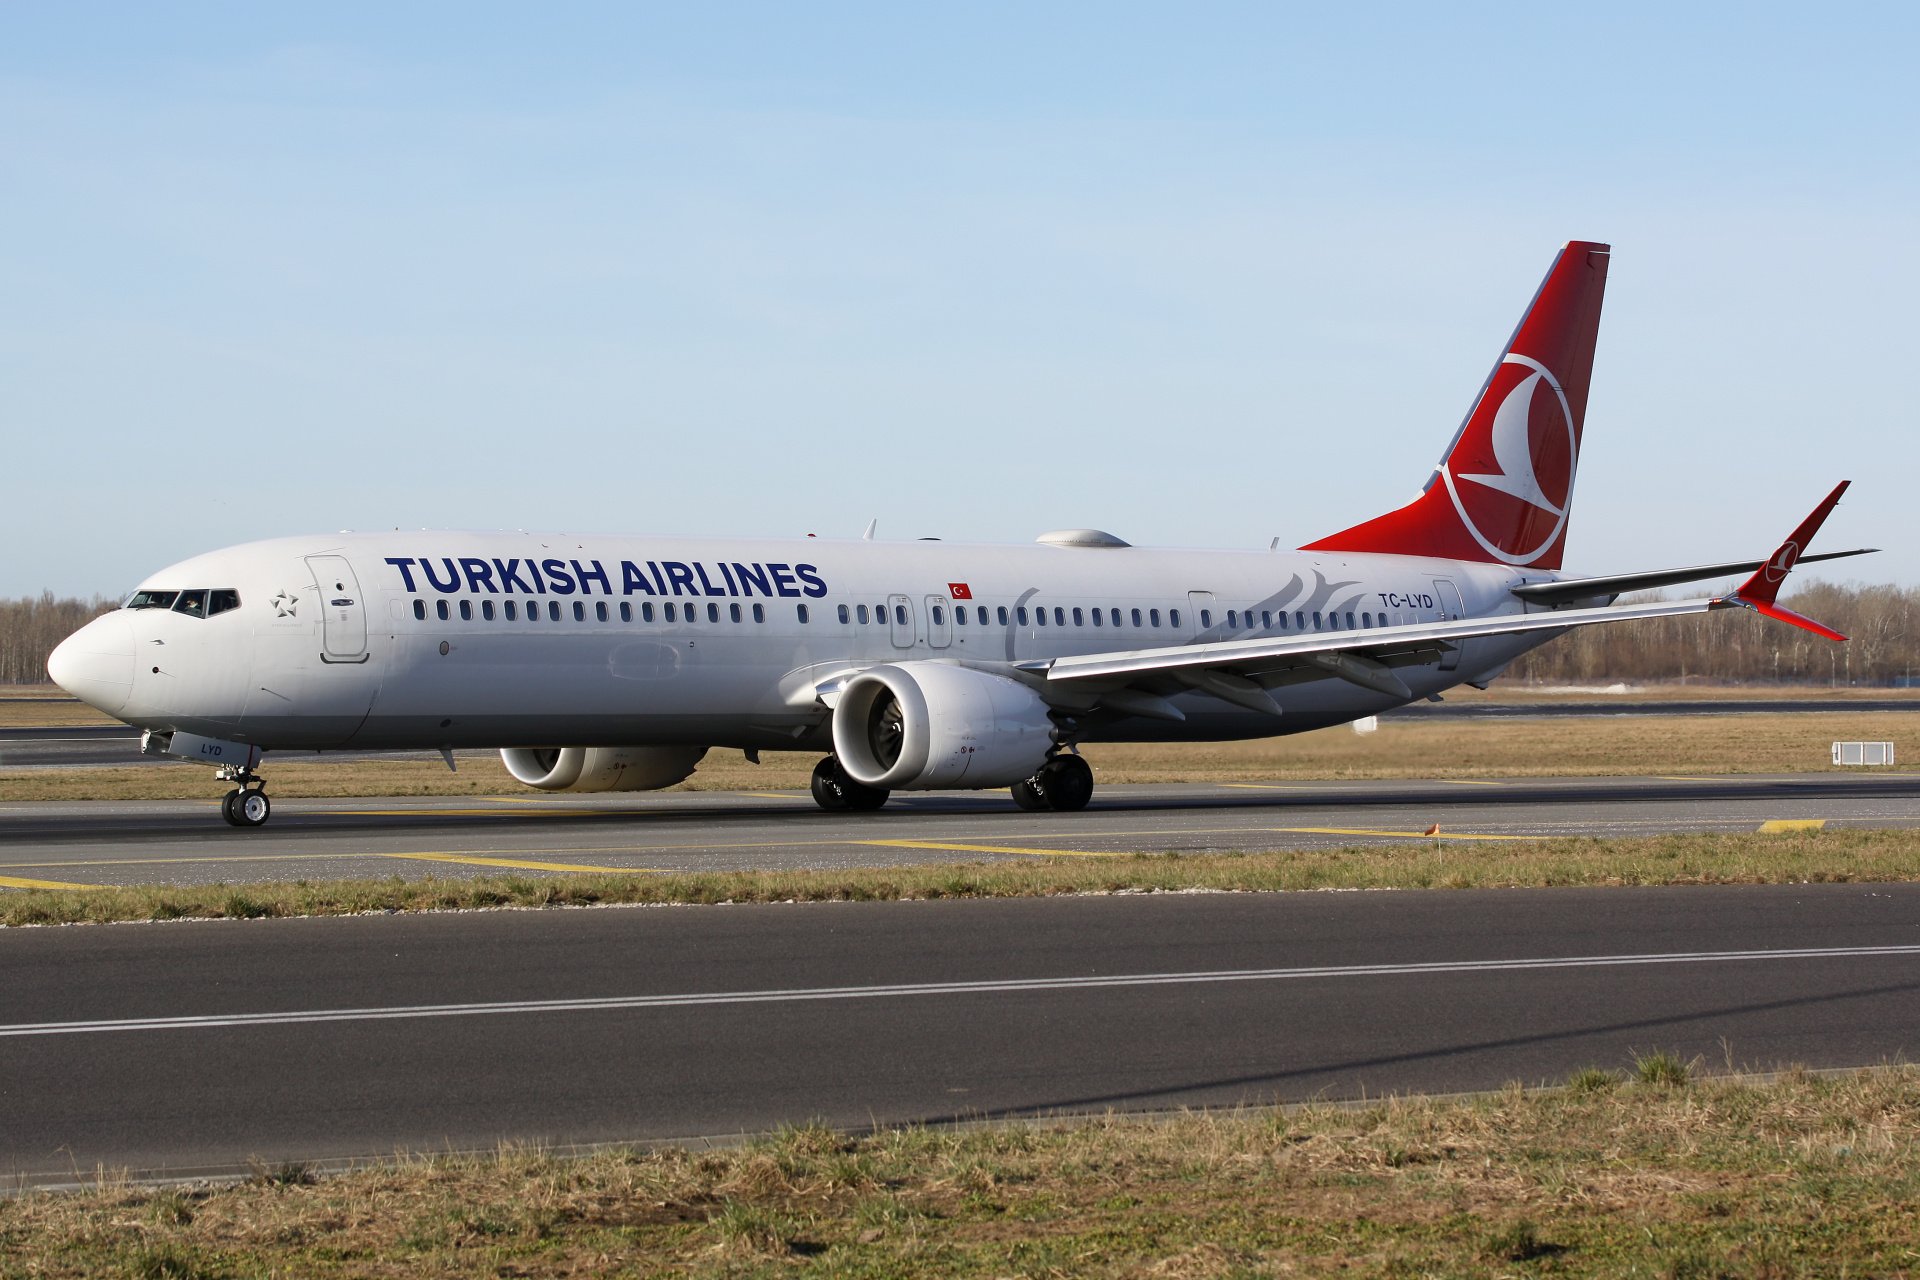 TC-LYD, THY Turkish Airlines (Aircraft » EPWA Spotting » Boeing 737-9 MAX)